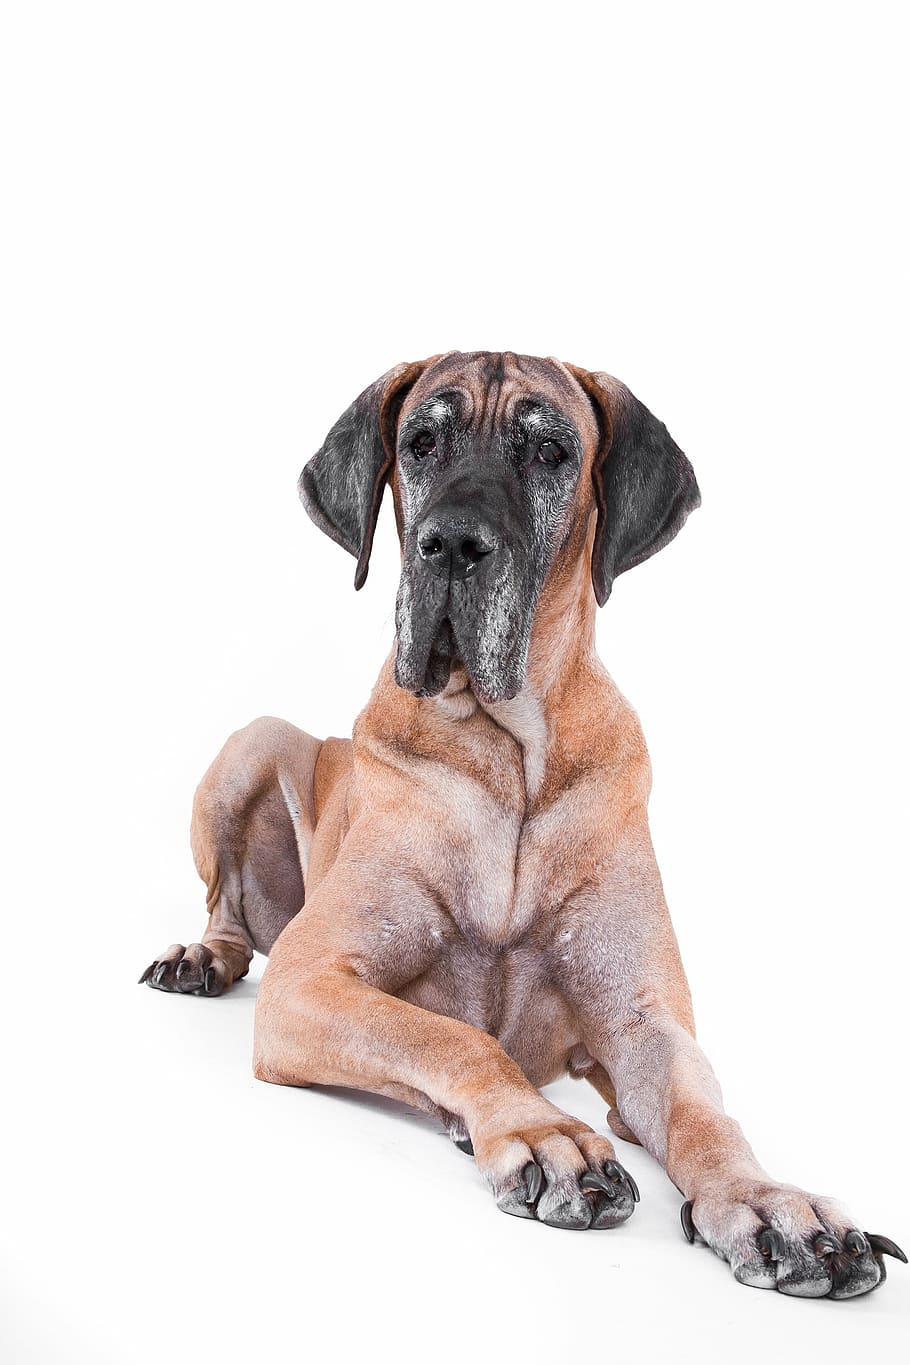 adult great dane, dog, great dane, lying, old, yellow, white, pets, animal, canine